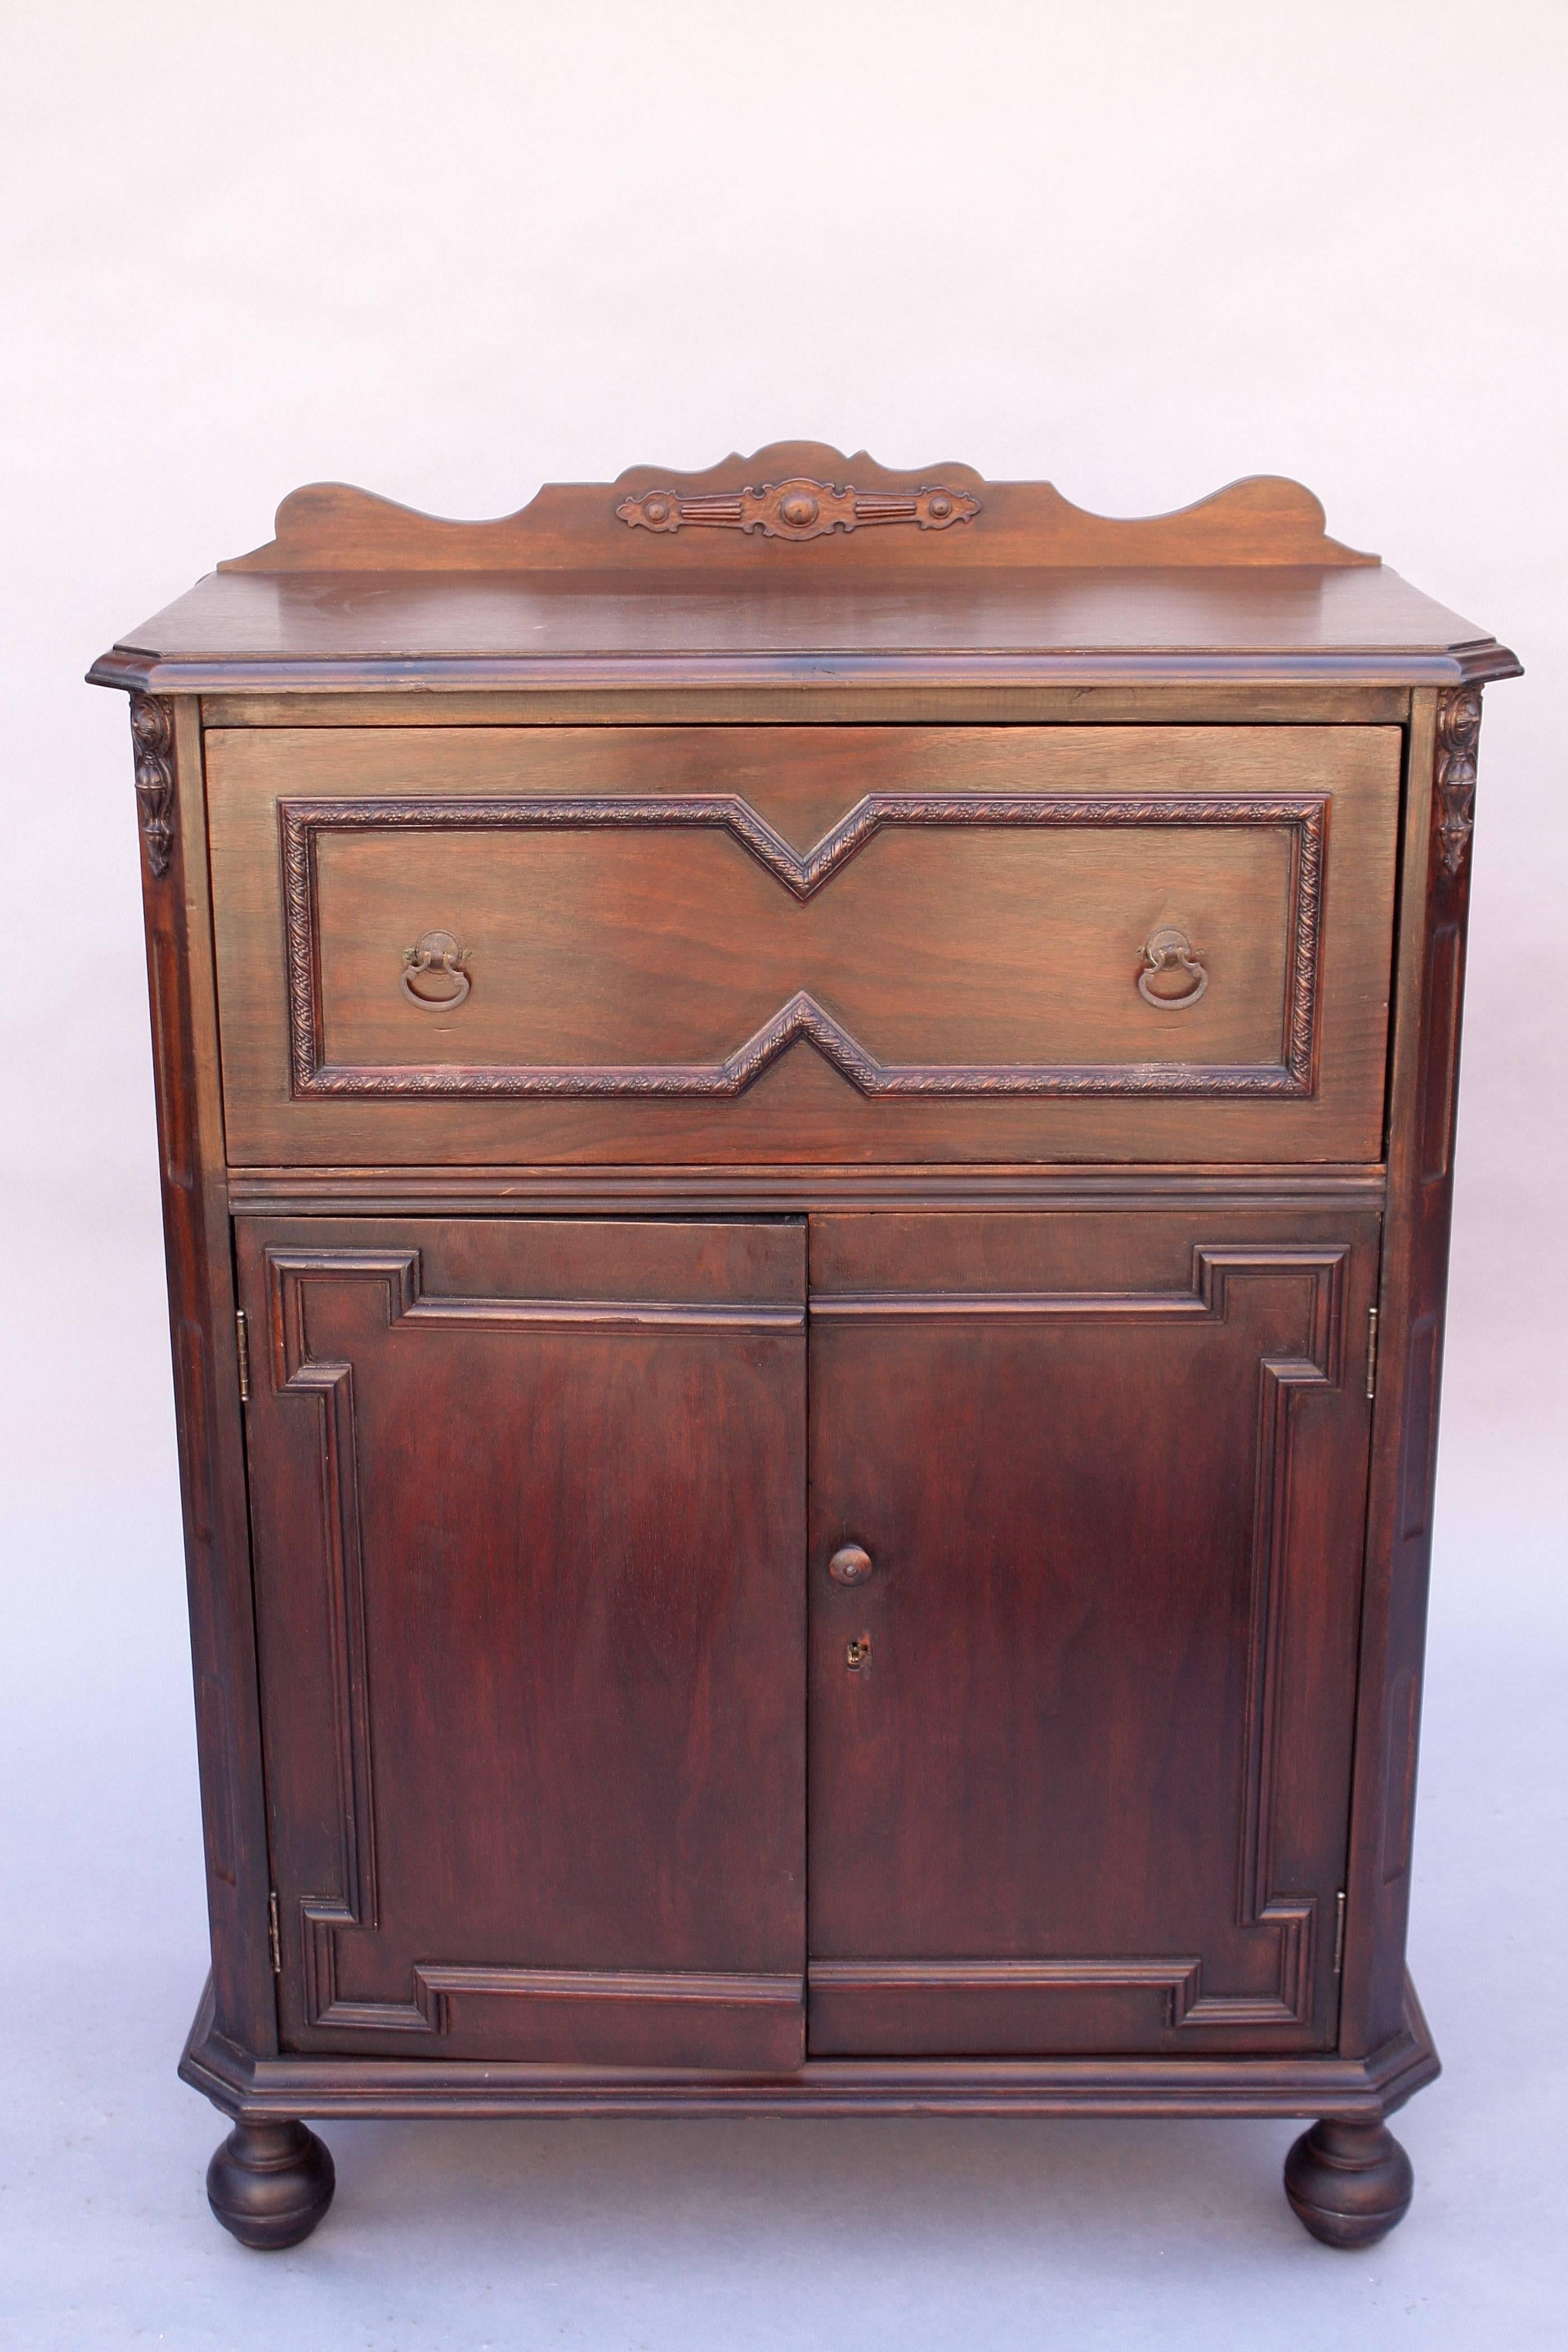 Writing desk with drop down front and lots of storage. Attributed to the Angeles Furniture Company, circa 1920s.